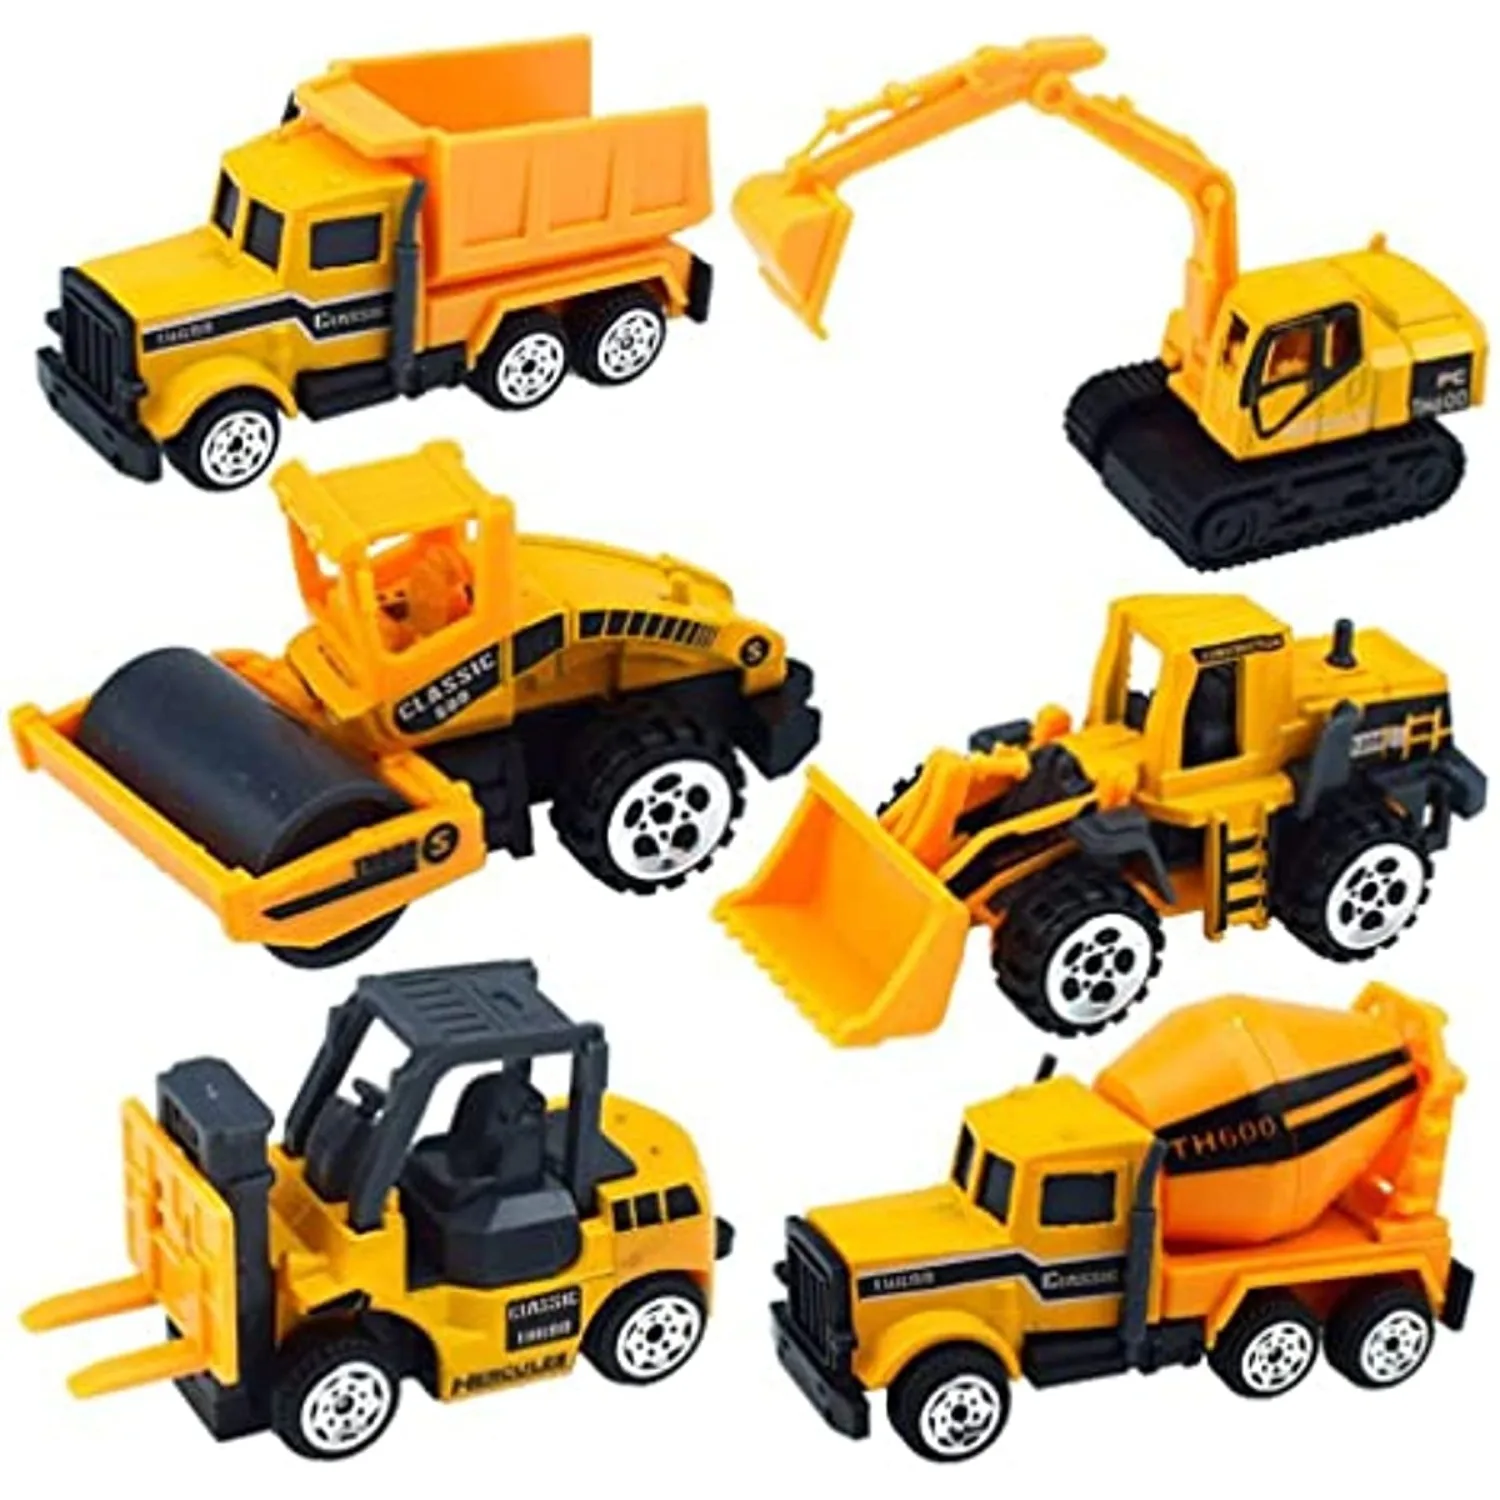 

6PCS Set Children Car Toys Alloy Fire Truck Police Car Excavator Diecast Construction Engineering Vehicle Toys For Boys Gift